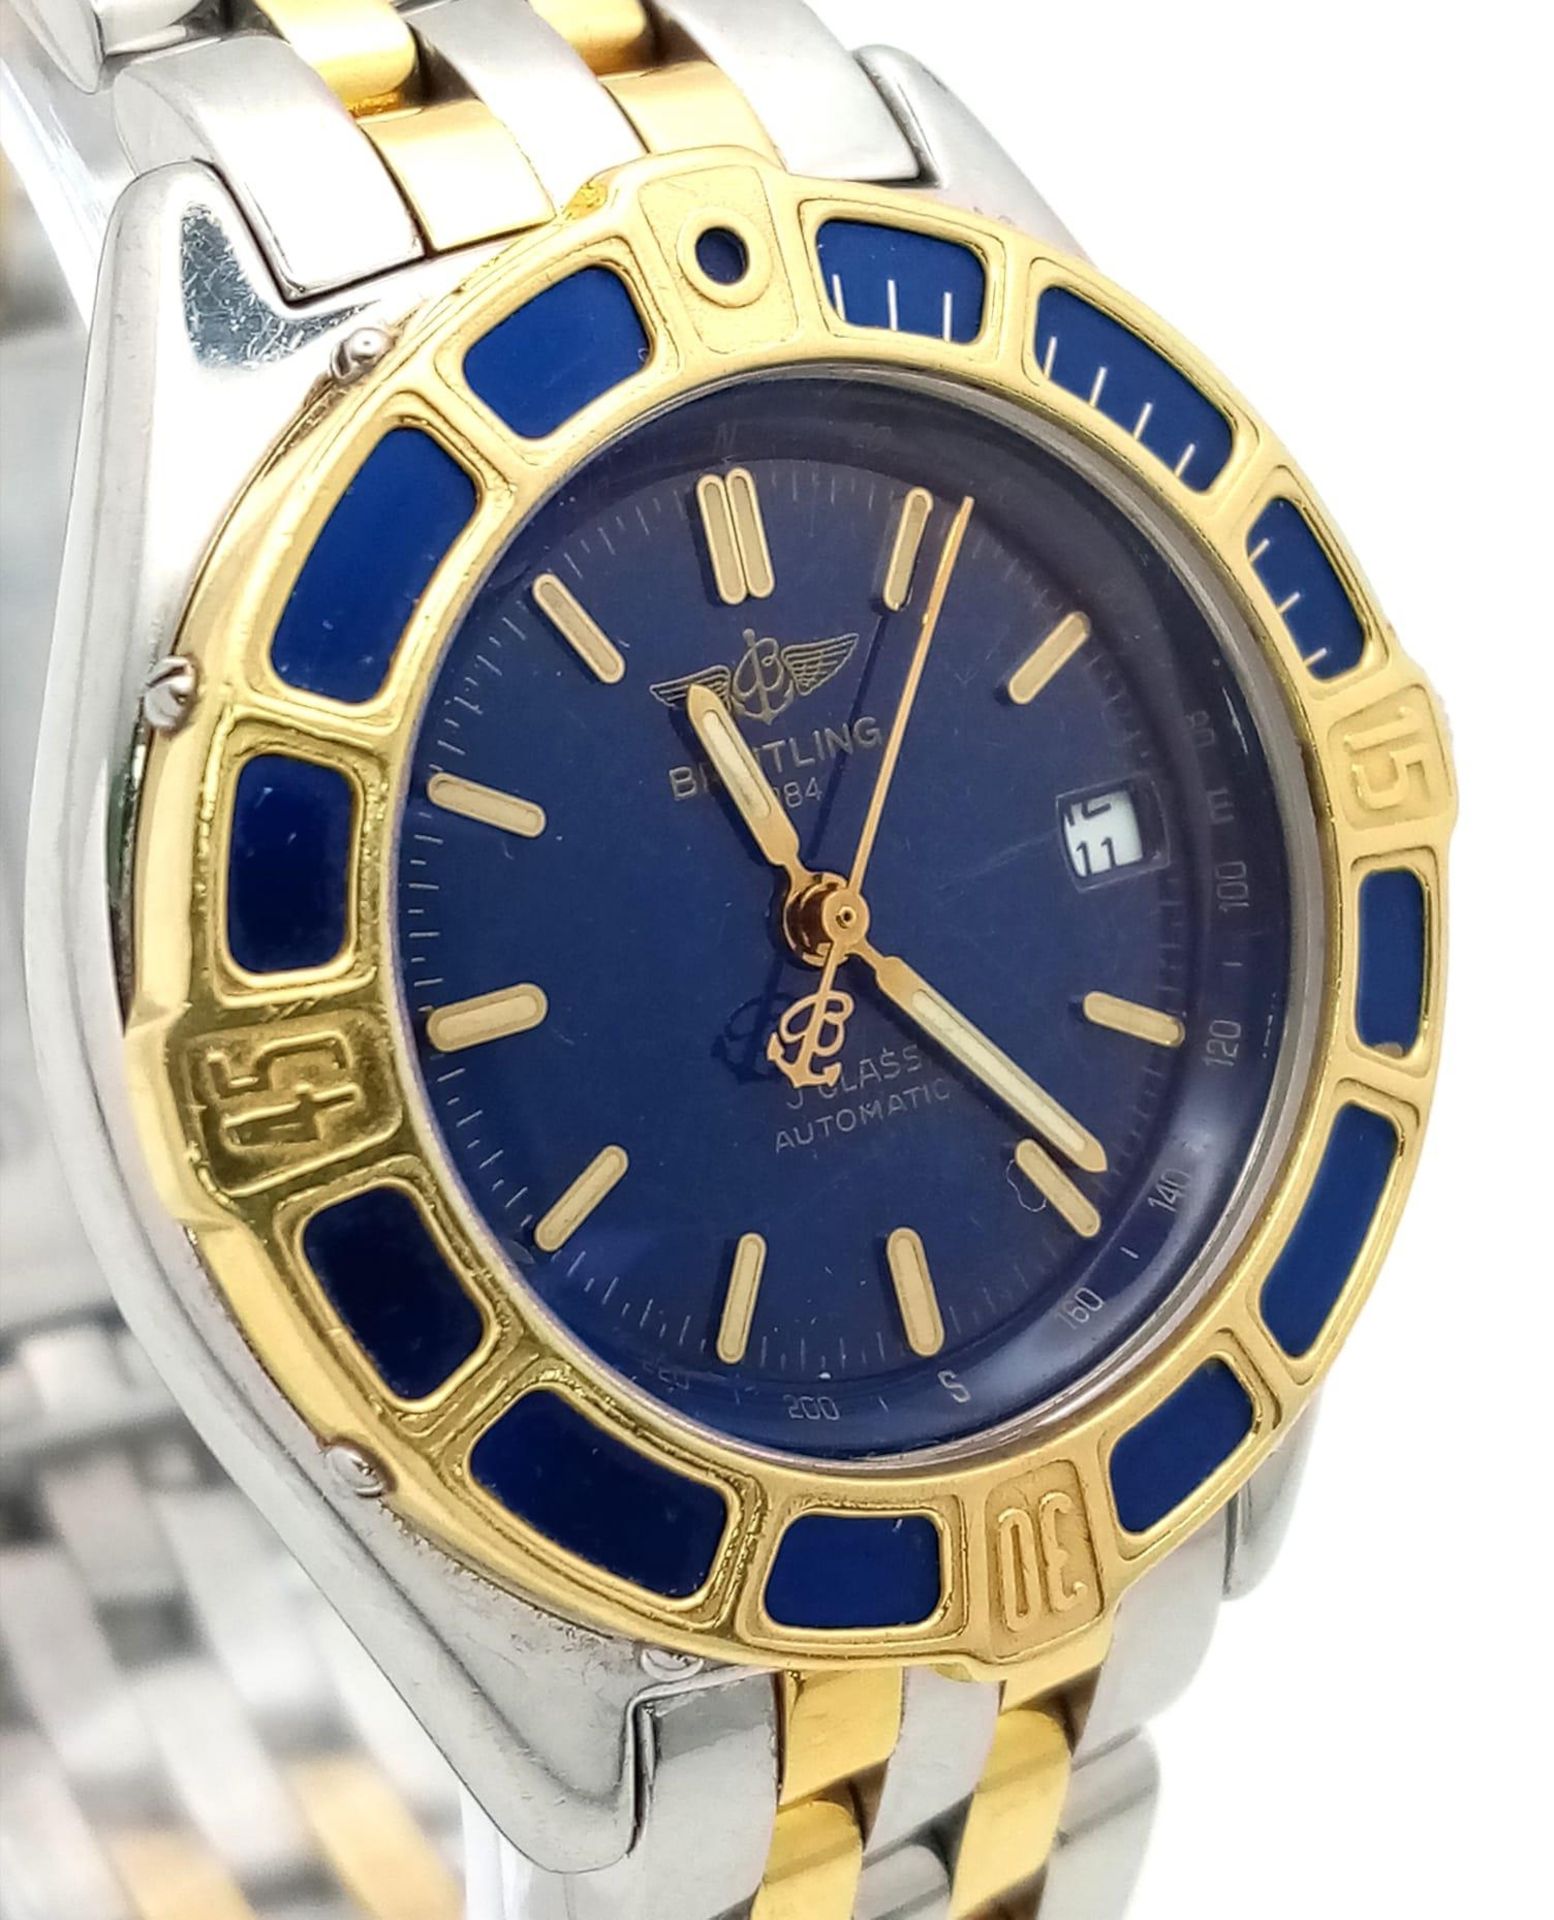 A BREITLING LADIES BI-METAL "J CLASS" AUTOMATIC WATCH WITH STUNNING BLUE DIAL AND MATCHIND ENAMEL - Image 3 of 7